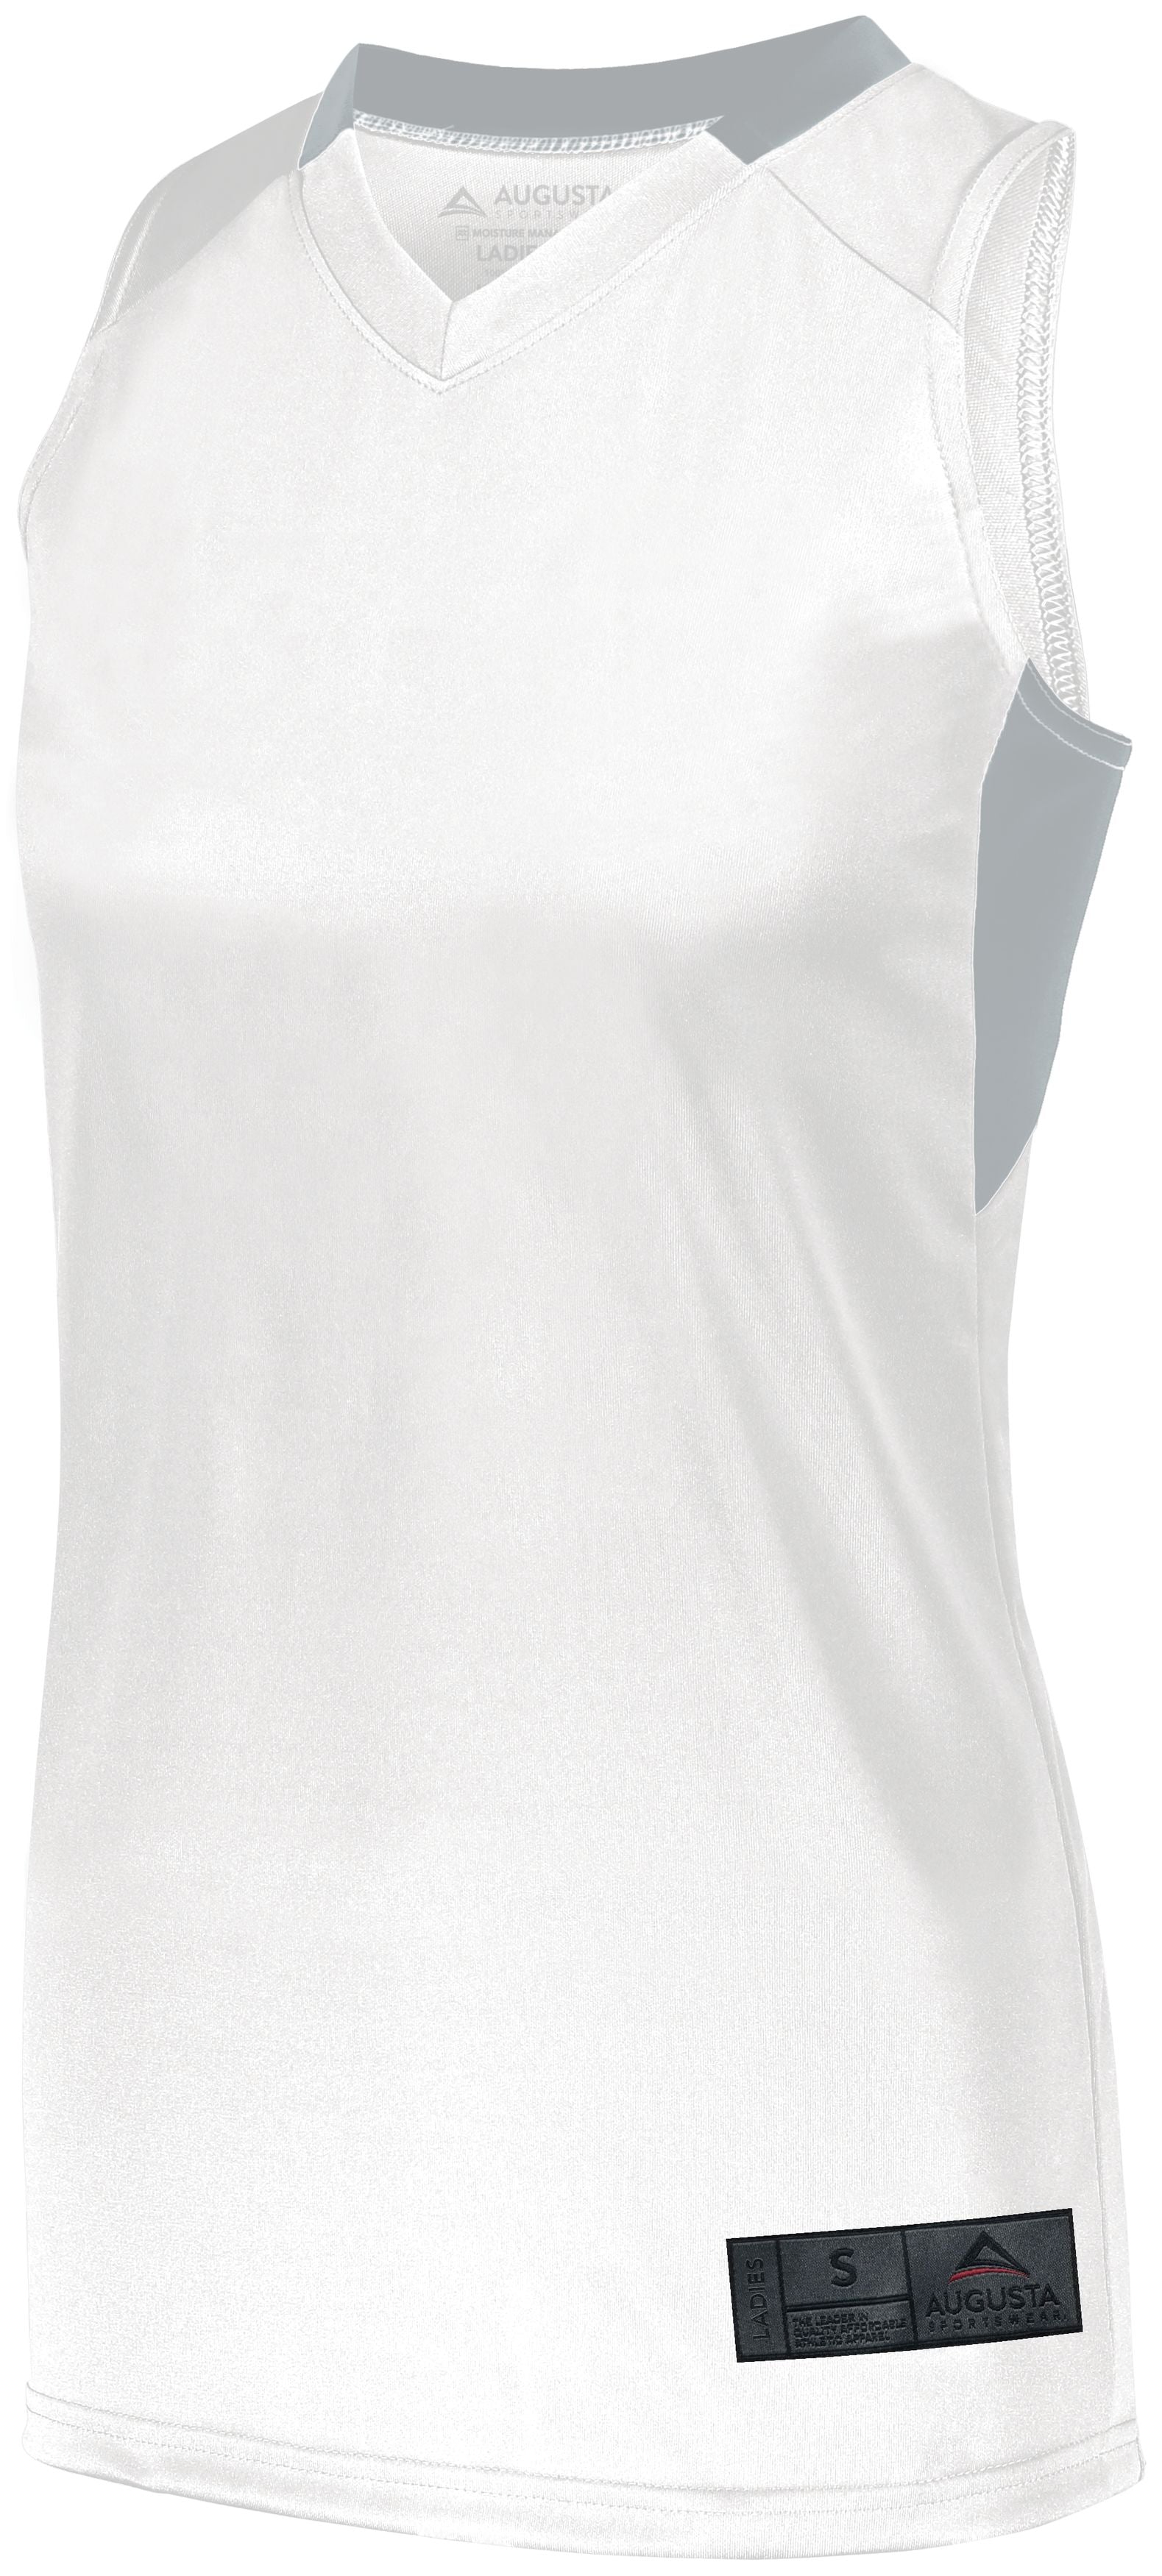 Augusta Sportswear Ladies Step-Back Basketball Jersey in White/Silver  -Part of the Ladies, Ladies-Jersey, Augusta-Products, Basketball, Shirts, All-Sports, All-Sports-1 product lines at KanaleyCreations.com